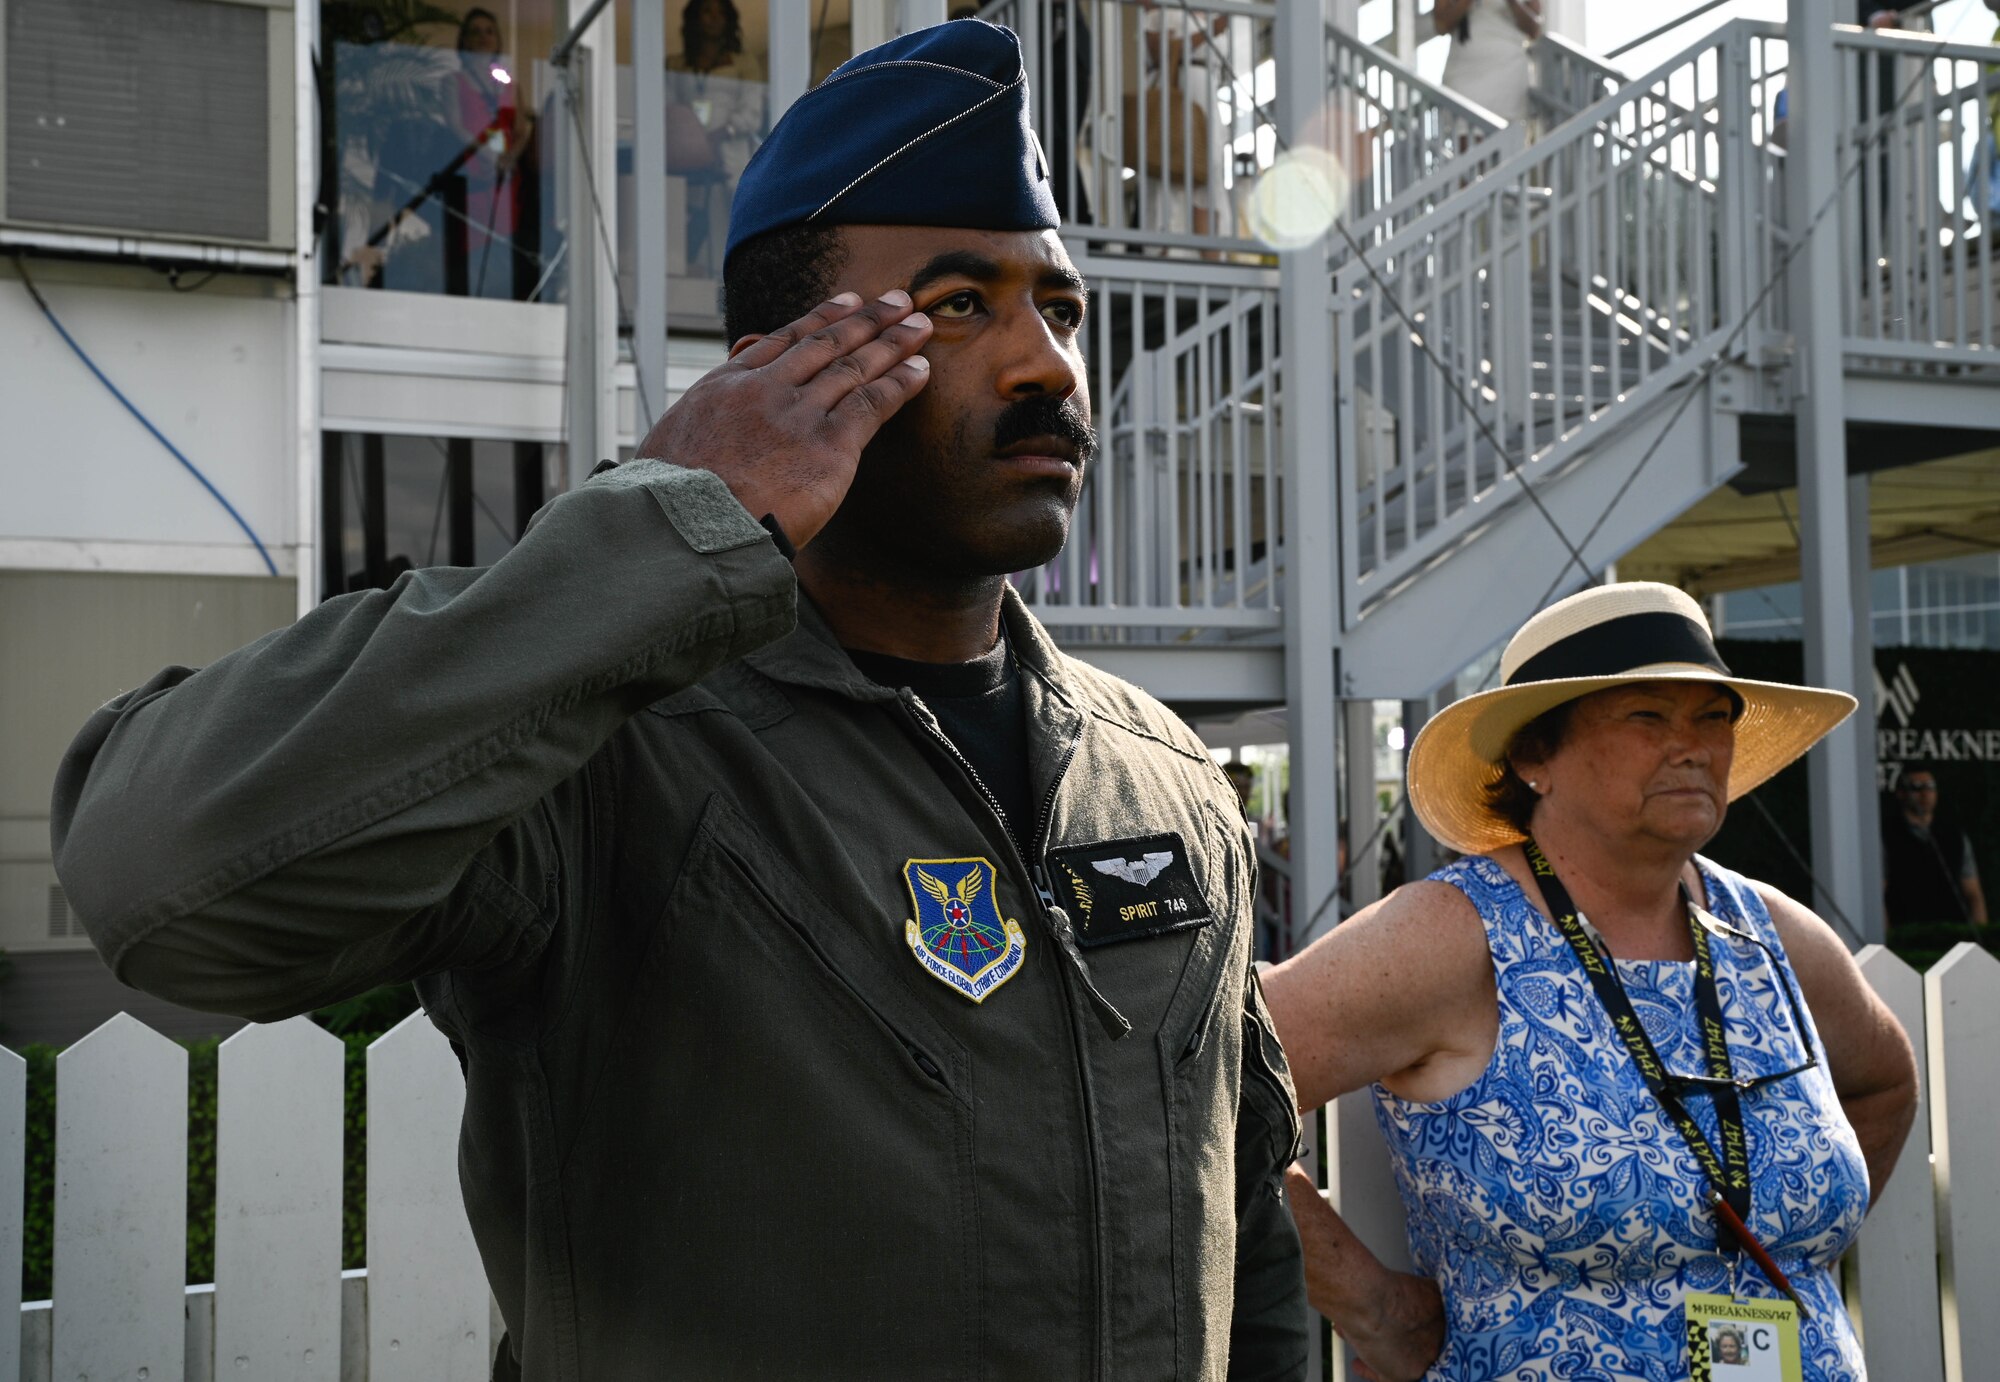 A U.S. Air Force B-2 Spirit pilot salutes during the National Anthem at the Pimlico race course, Baltimore, Maryland, May 21, 2022. The Preakness Stakes is an American thoroughbred horse race held on the third Saturday in May each year in Baltimore, Maryland.